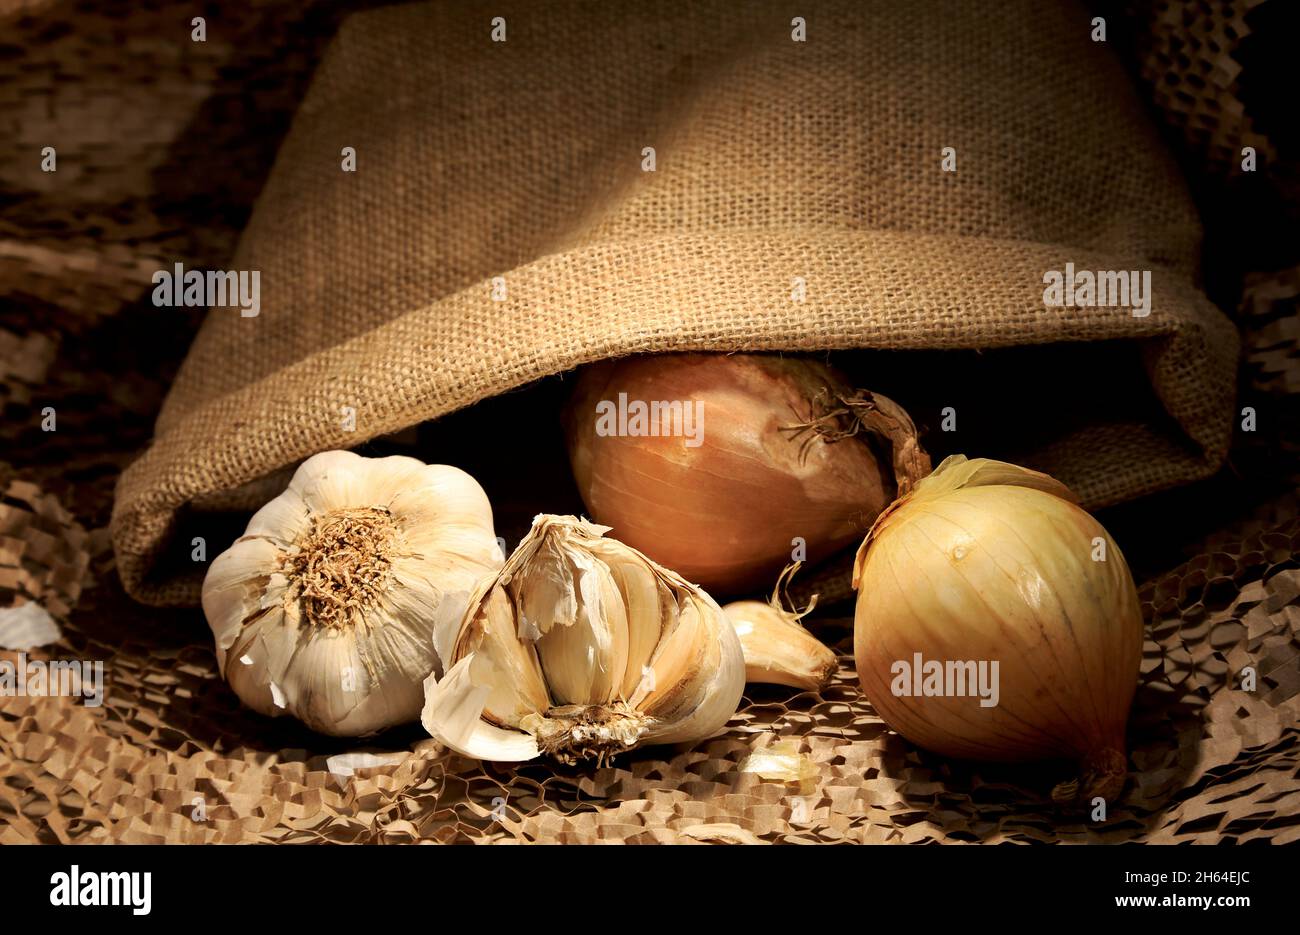 Onion and garlic with jute bag Stock Photo